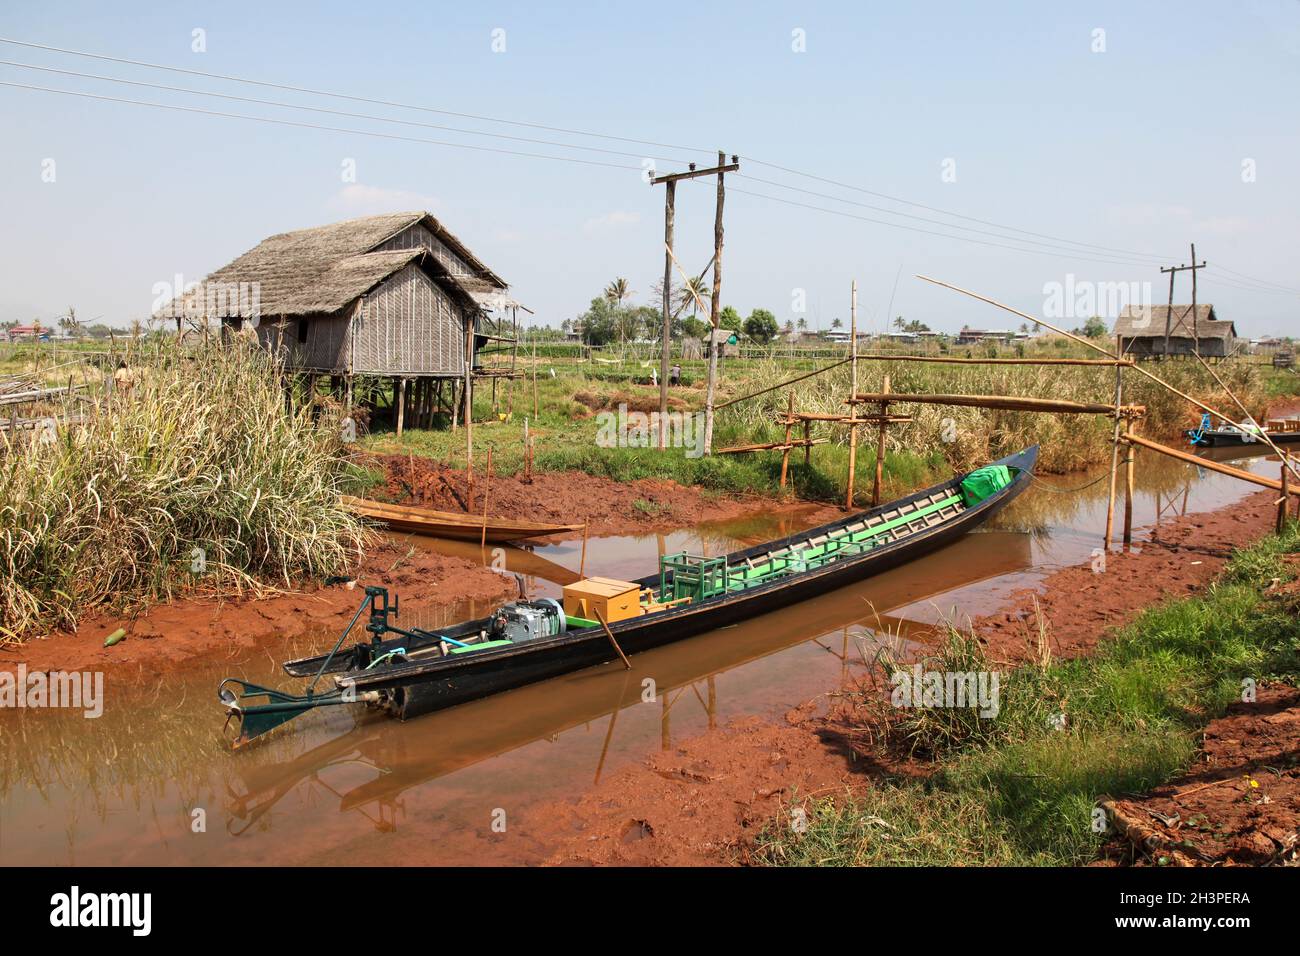 Rural scene at Inle Lake Myanmar - Burma. A long tail boat in one of the canals that leads to Inle Lake. Inle lake is Myanmar's second larget lake and Stock Photo